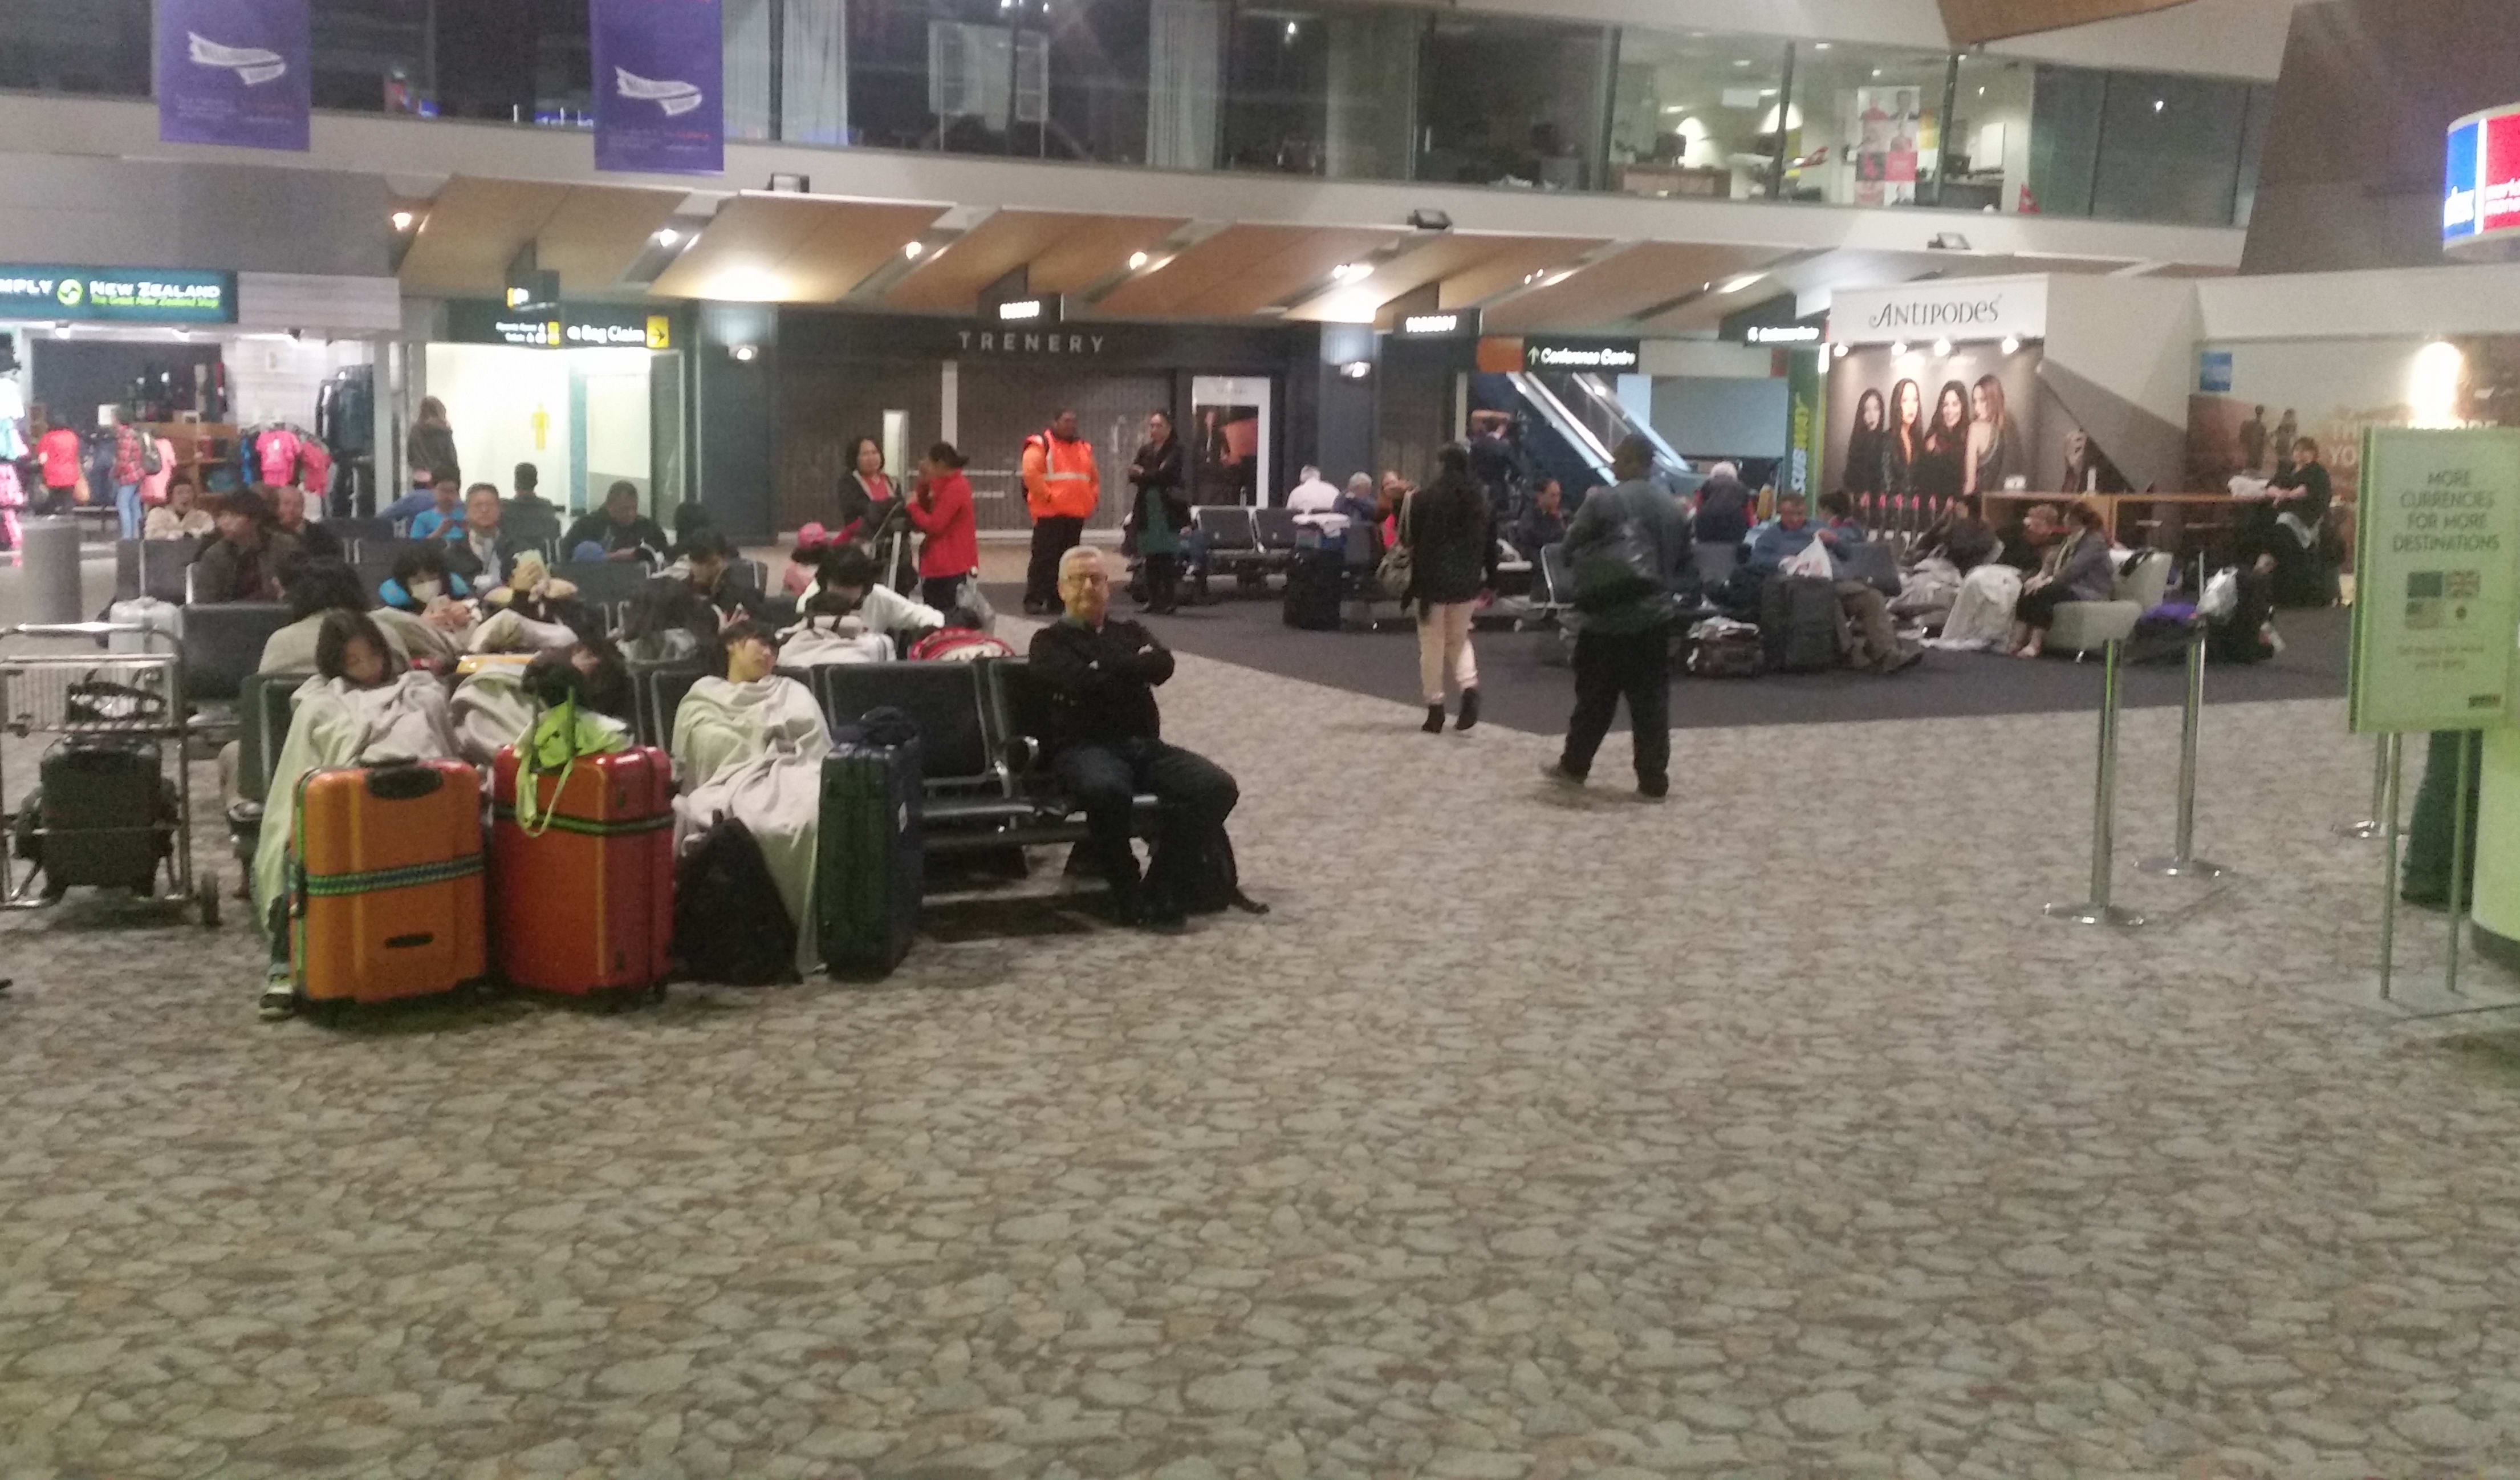 Fog delays flights at Wellington Airport where passengers slept overnight in the terminal. photo taken 30 March.